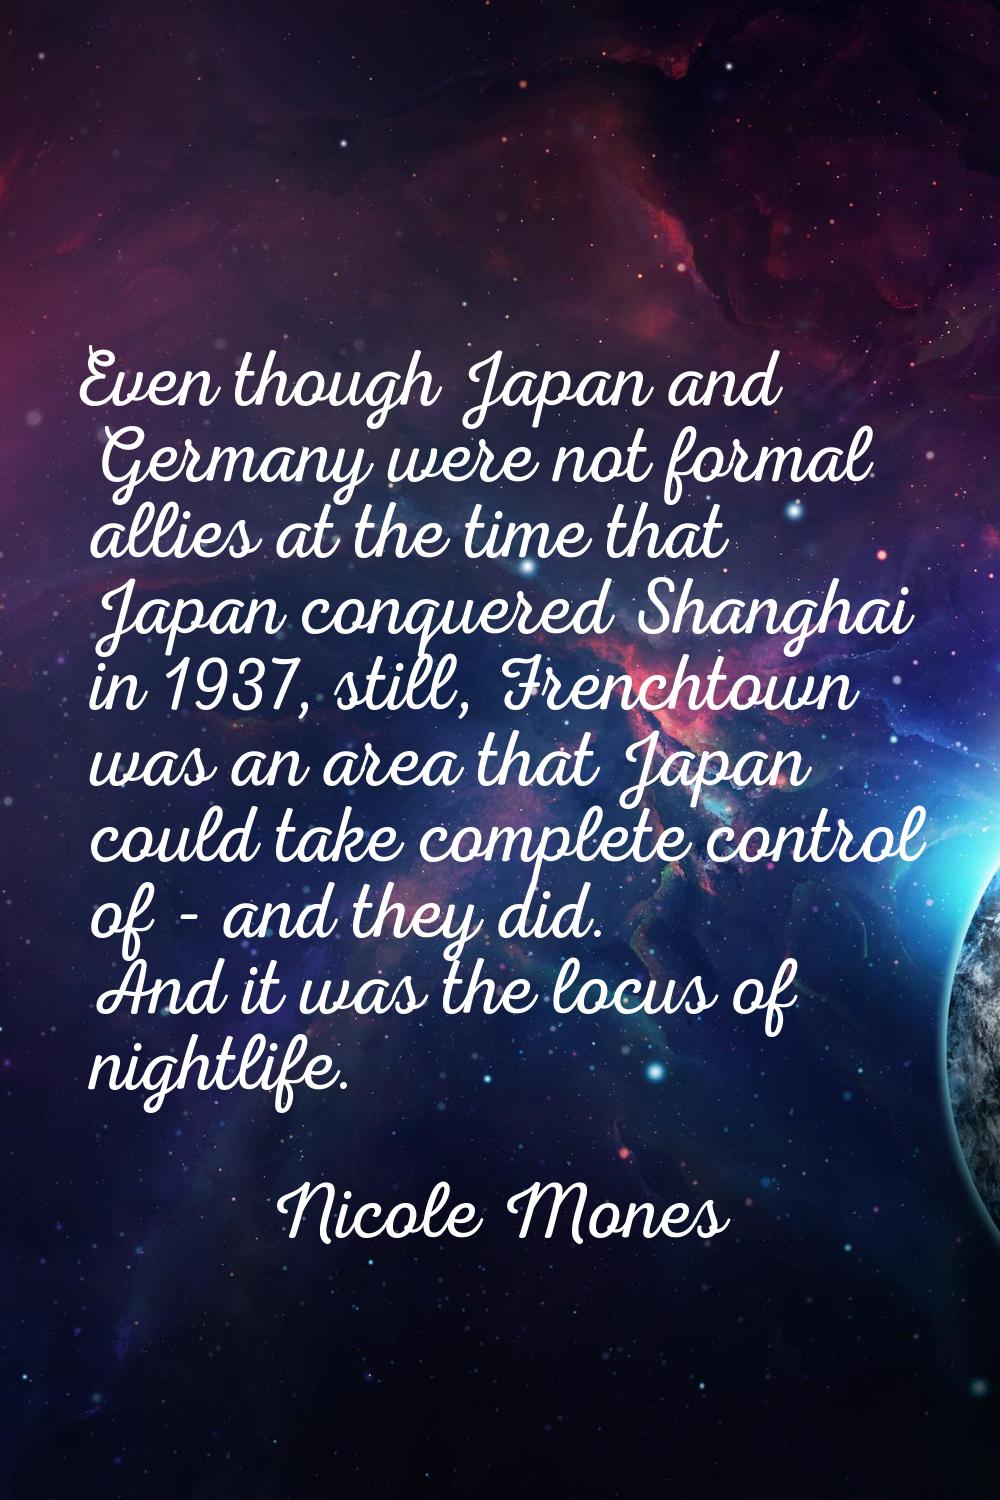 Even though Japan and Germany were not formal allies at the time that Japan conquered Shanghai in 1